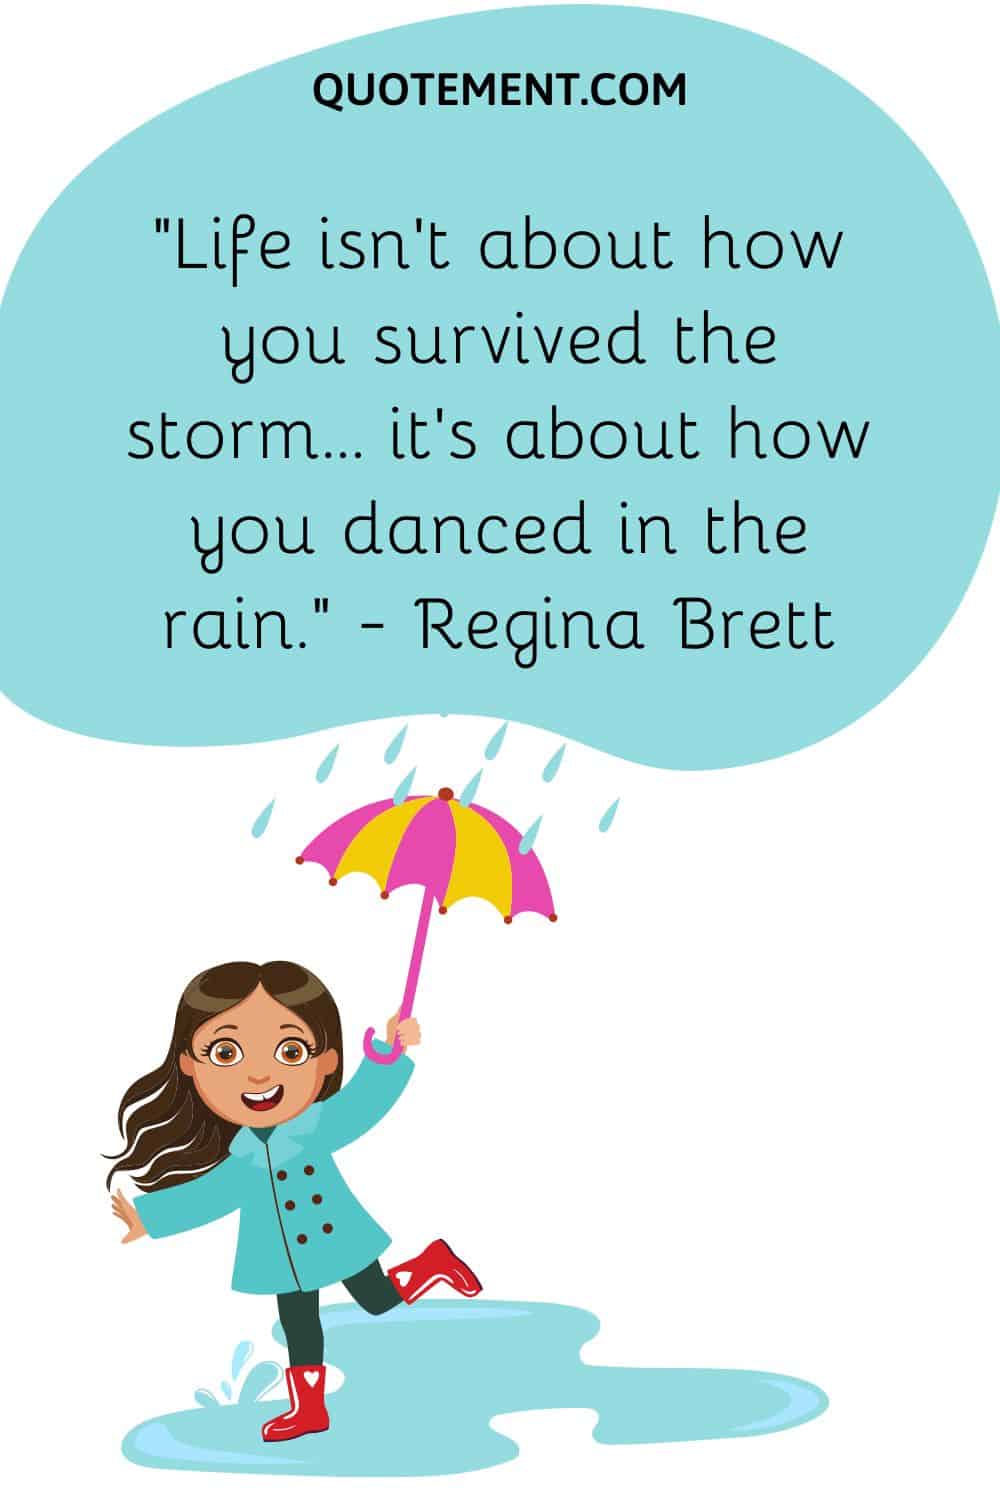 Life isn't about how you survived the storm... it's about how you danced in the rain